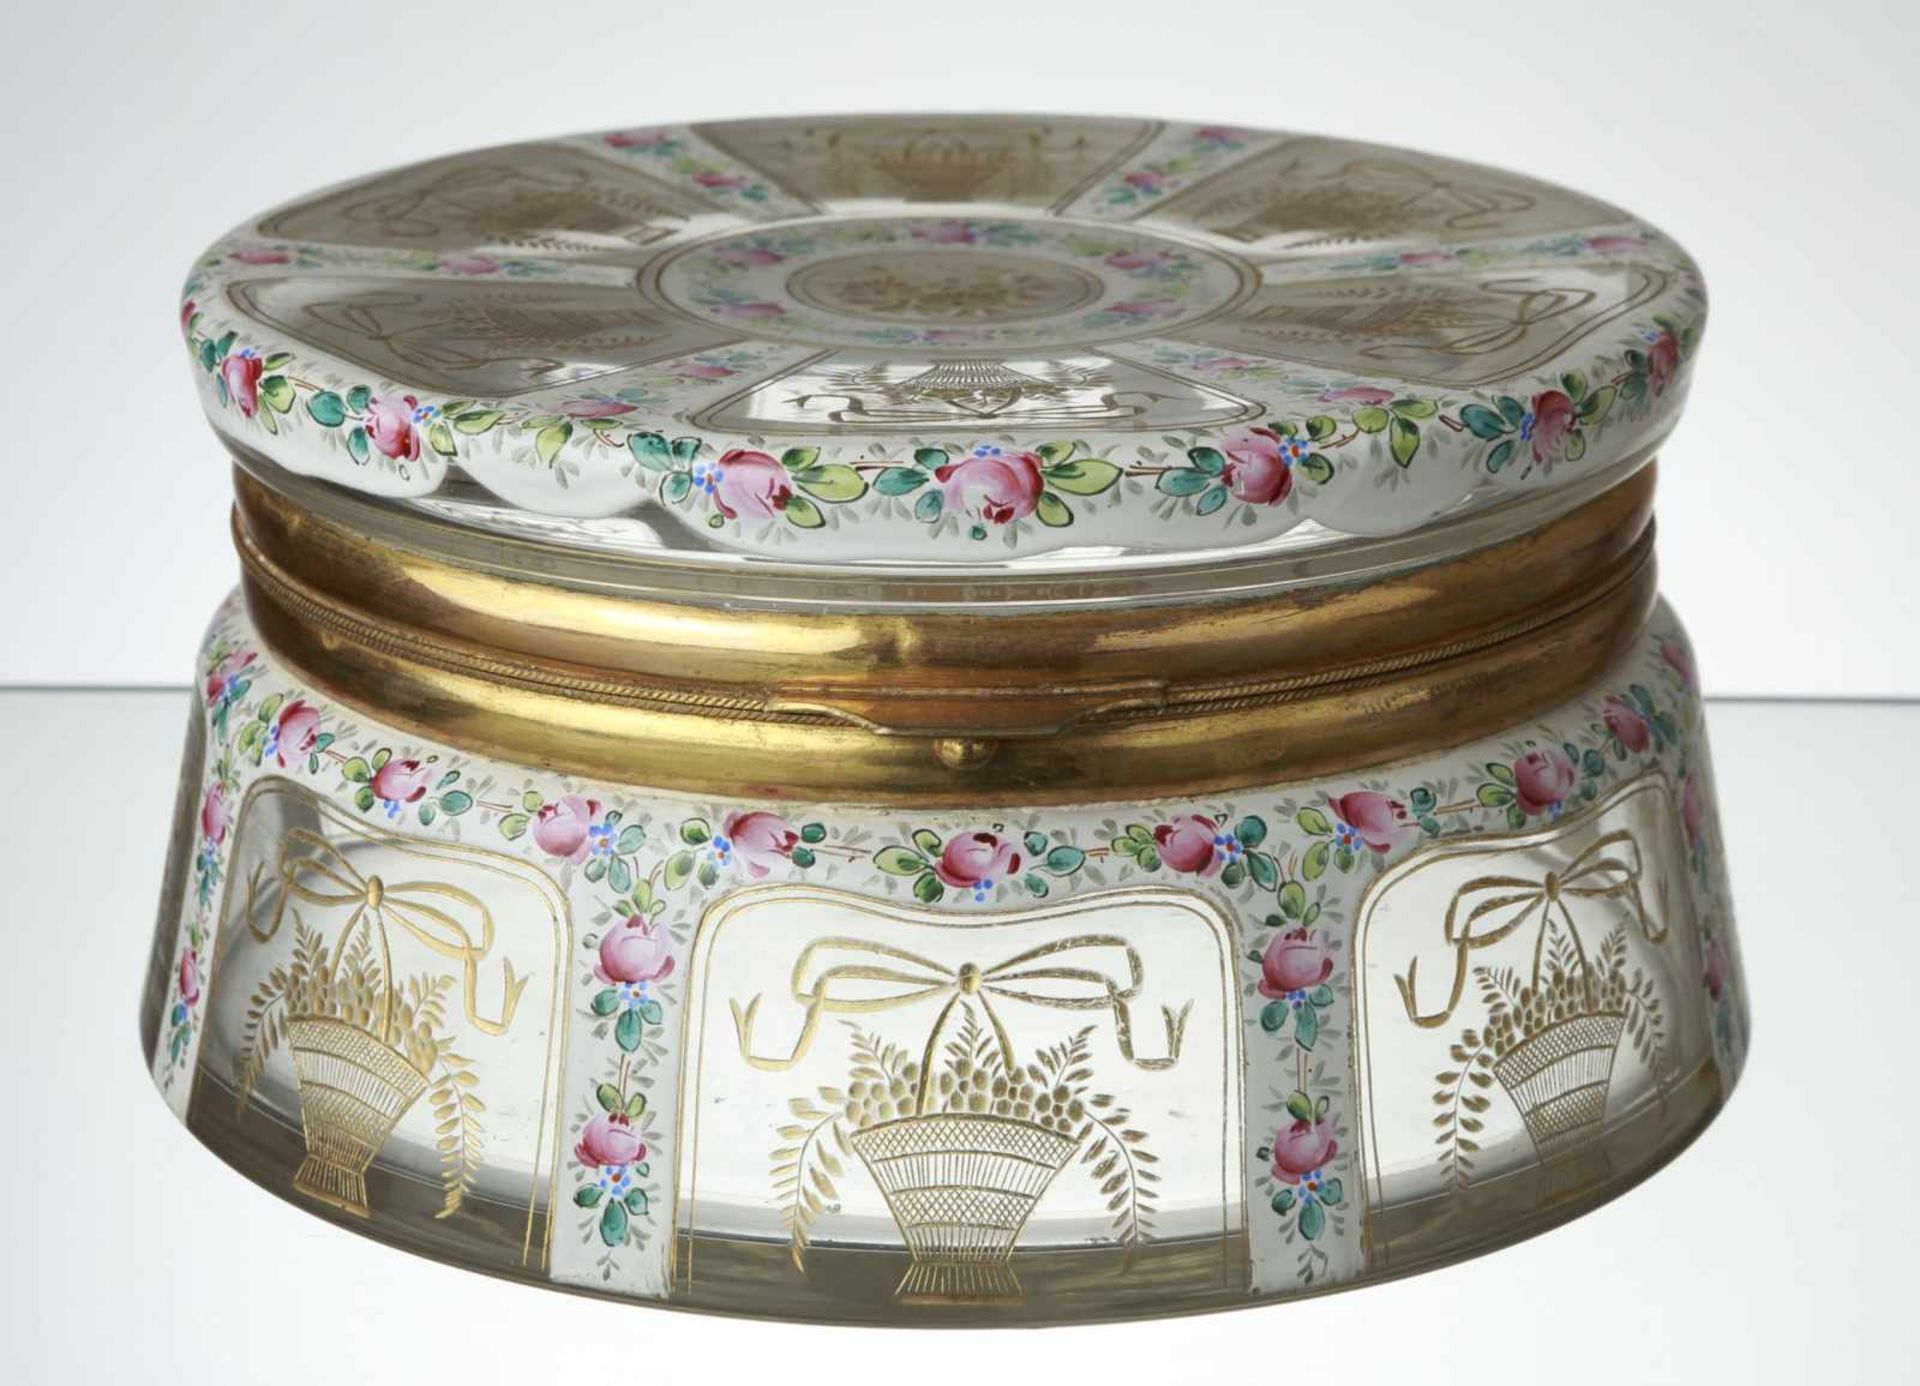 Czech glass bowl decorated by enamel Bohemia, late 19th century, clear glass, metal assembly, gilded